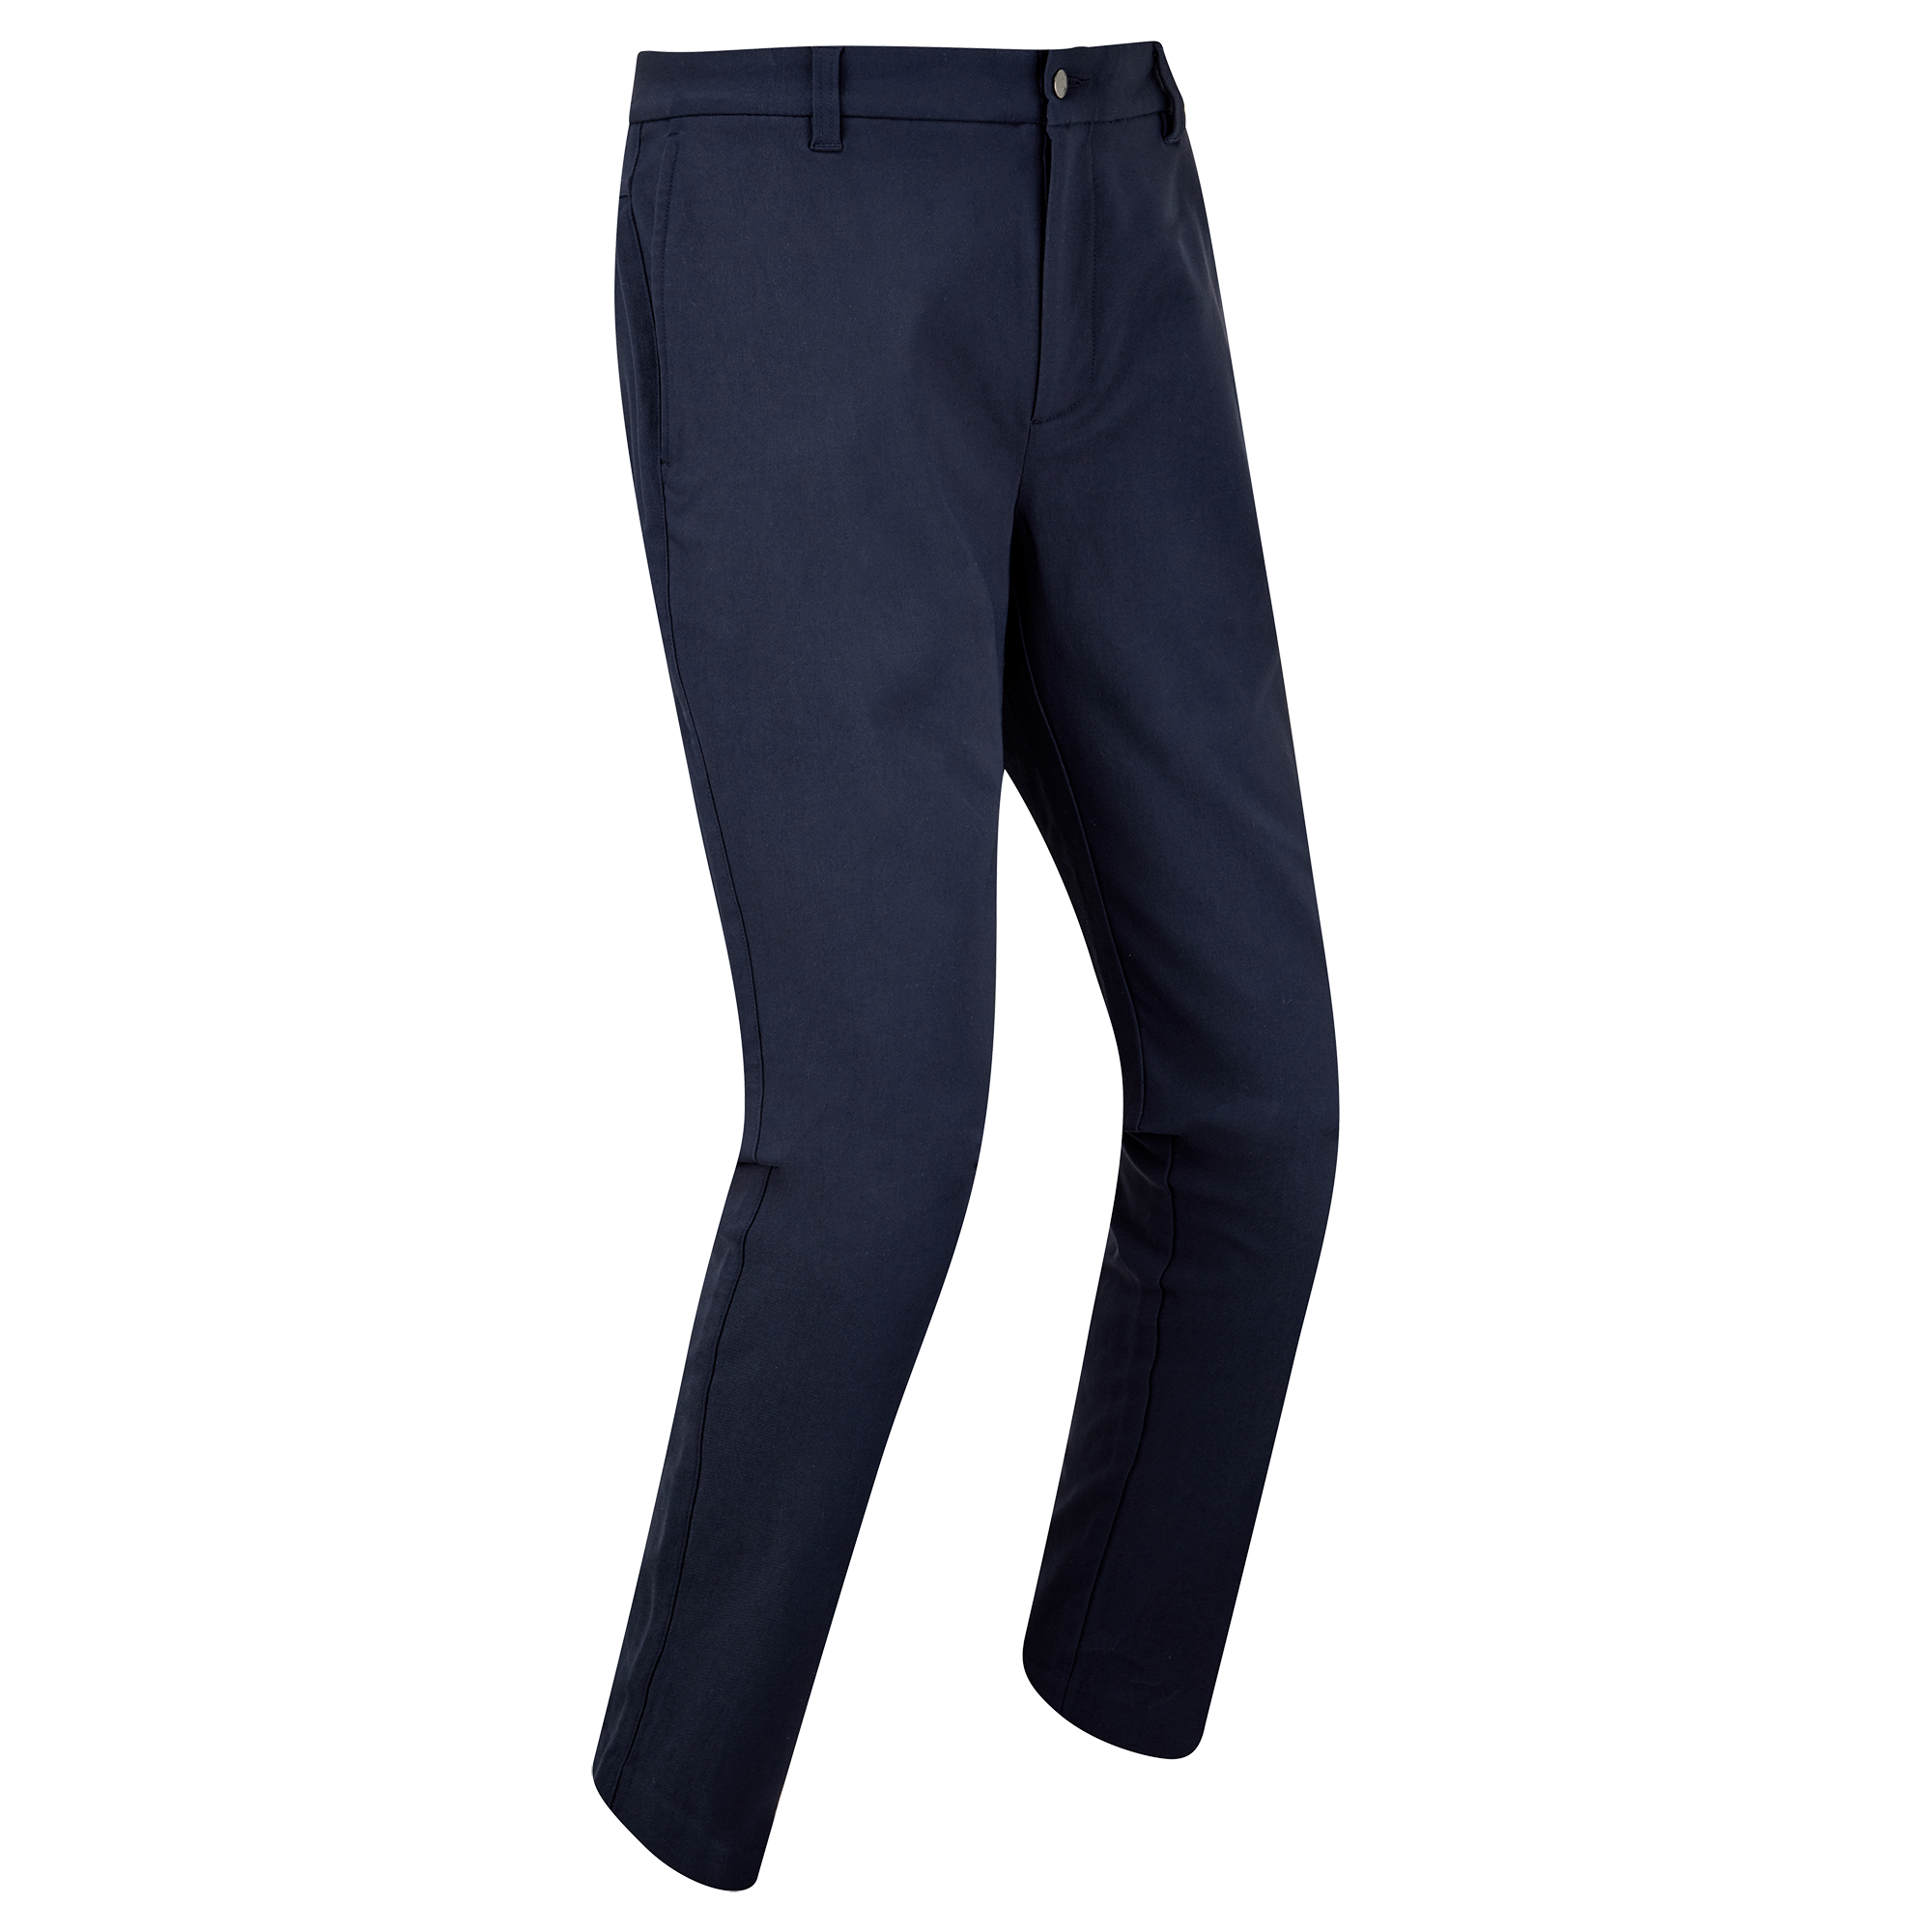 FootJoy Performance Slim Fit Trouser from Discount Golf Store